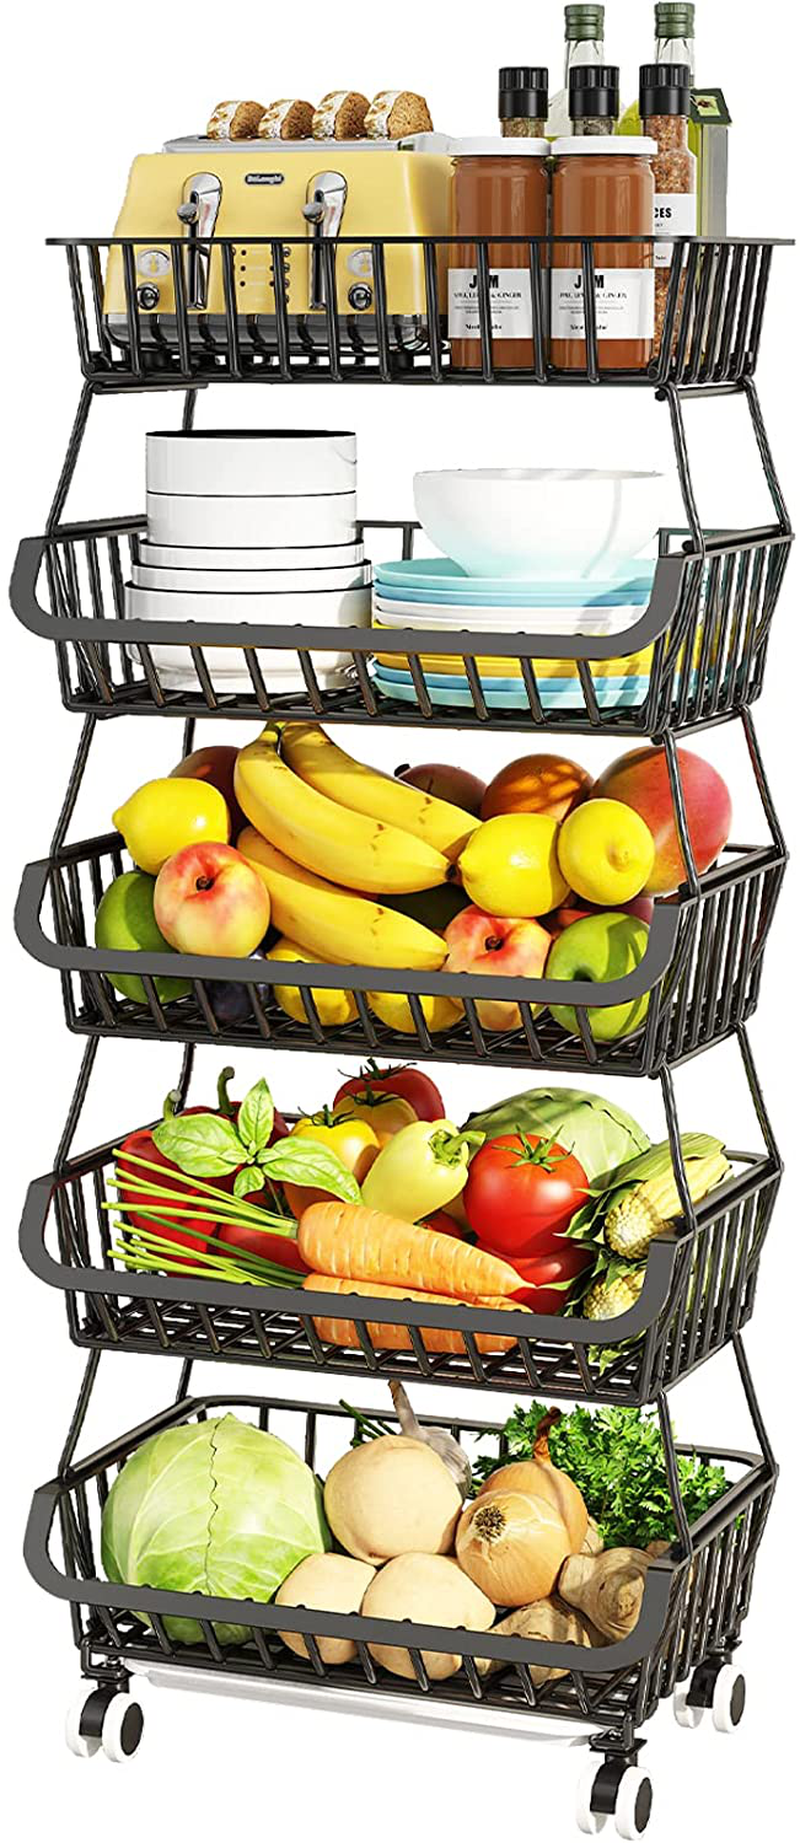 Fruit Basket for Kitchen Storage - 5 Tier Vegetable Organizer Stackable Metal Wire Baskets with Rolling Wheels Utility Bins Rack Cart for Produce Pantry Laundry Garage, Black Home & Garden > Kitchen & Dining > Food Storage Mchoter   